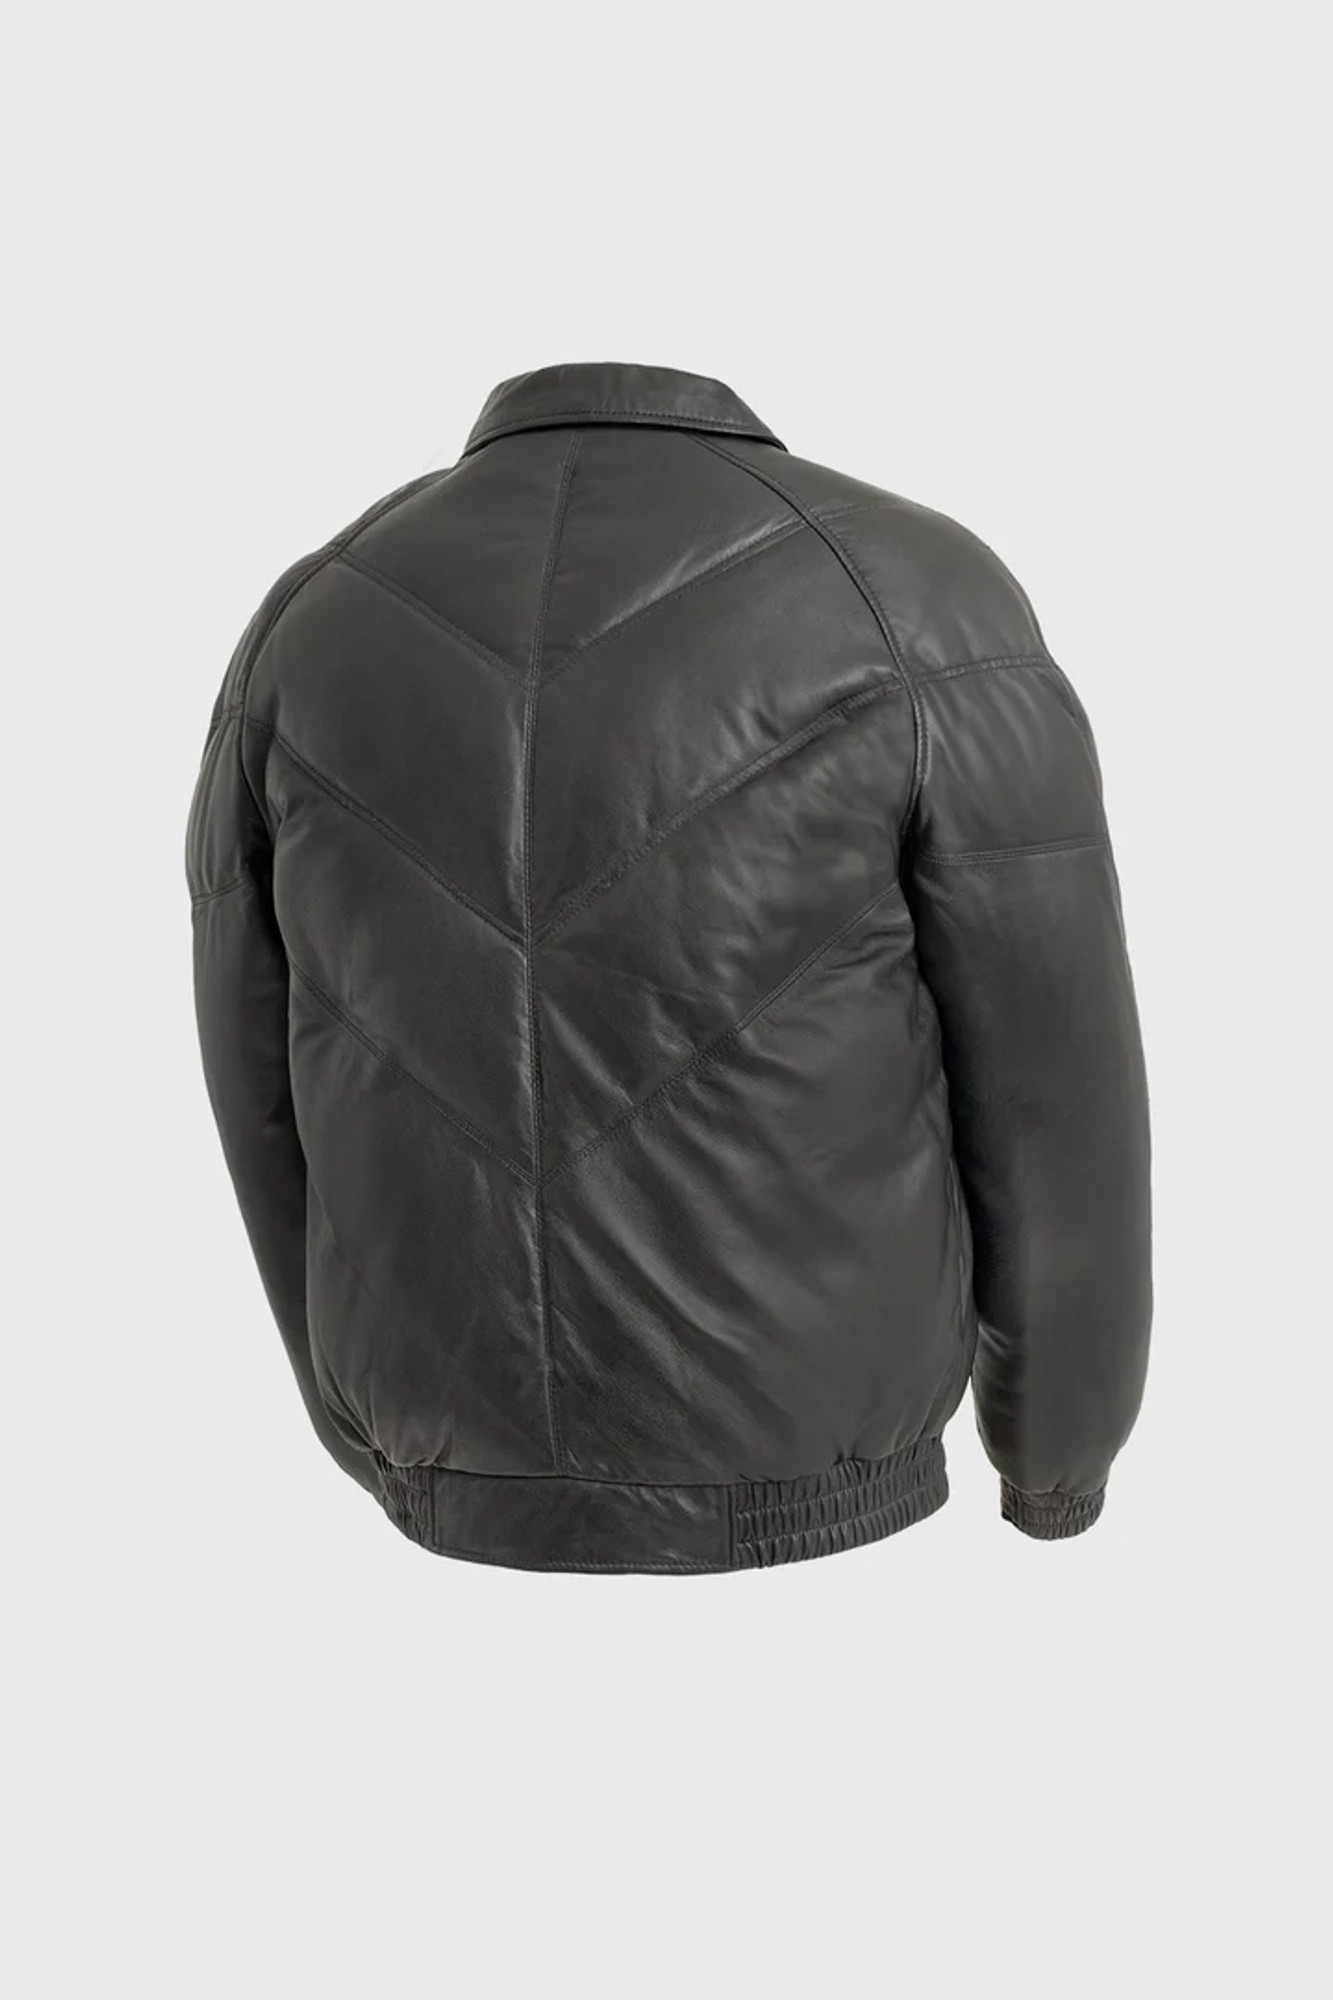 Double Goose  The original down leather jackets